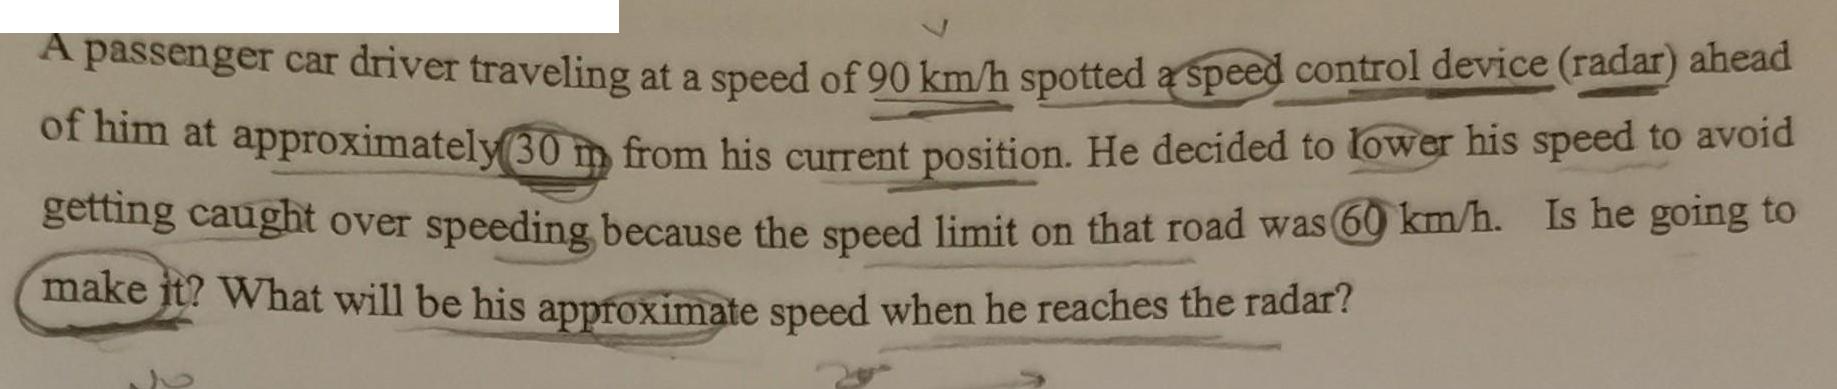 A passenger car driver traveling at a speed of 90 km/h spotted a speed control device (radar) ahead of him at